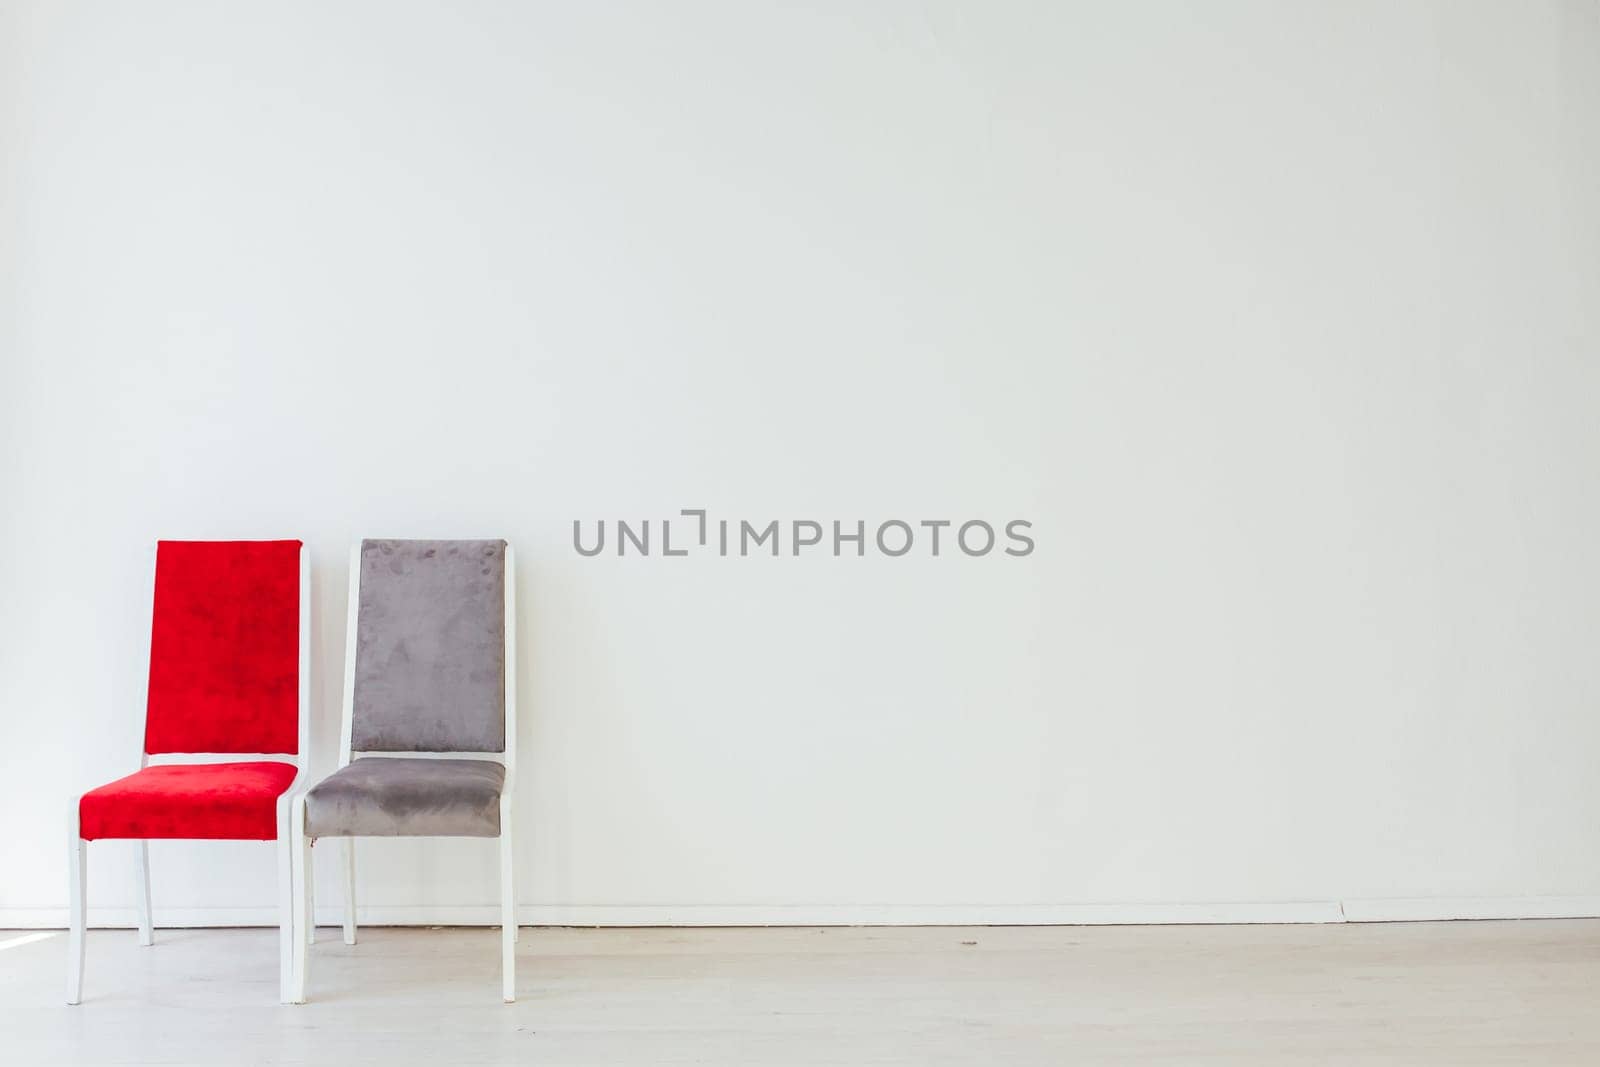 two vintage chairs in an empty white room by Simakov